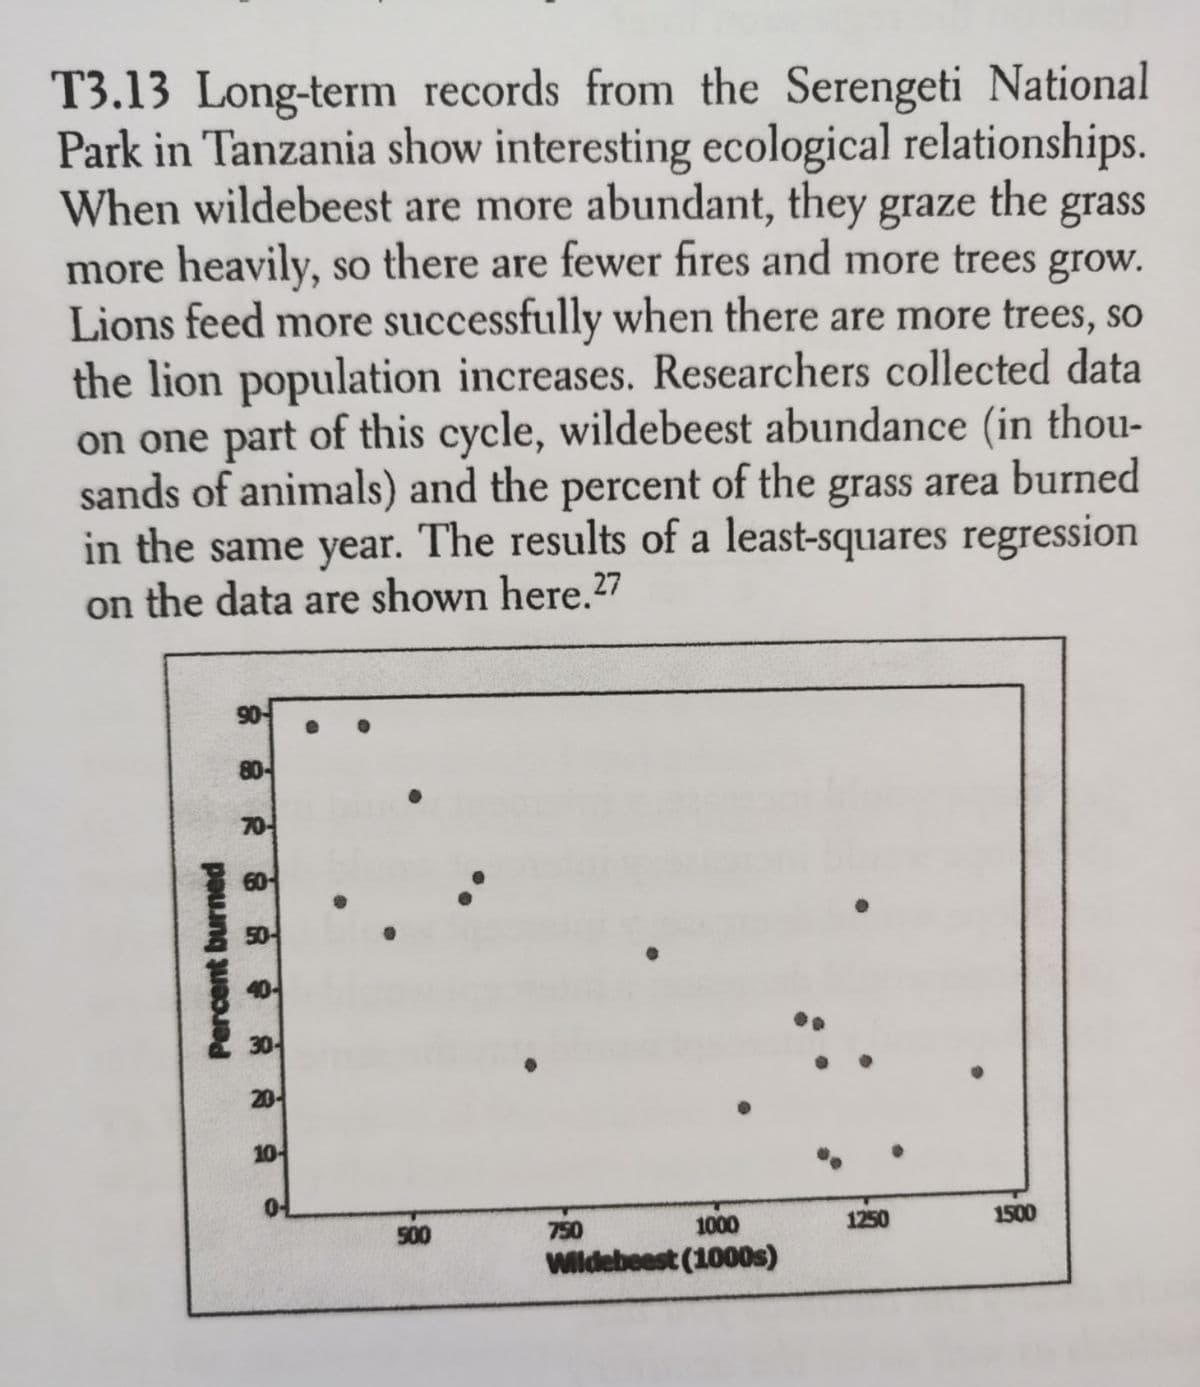 T3.13 Long-term records from the Serengeti National
Park in Tanzania show interesting ecological relationships.
When wildebeest are more abundant, they graze the
more heavily, so there are fewer fires and more trees grow.
Lions feed more successfully when there are more trees, so
the lion population increases. Researchers collected data
on one part of this cycle, wildebeest abundance (in thou-
sands of animals) and the percent of the grass area burned
in the same year. The results of a least-squares regression
on the data are shown here.27
grass
06
80-
70
60
50-
40-
30-
20-
10-
1500
1000
Wildebeest (1000s)
500
750
1250
Percent burned
